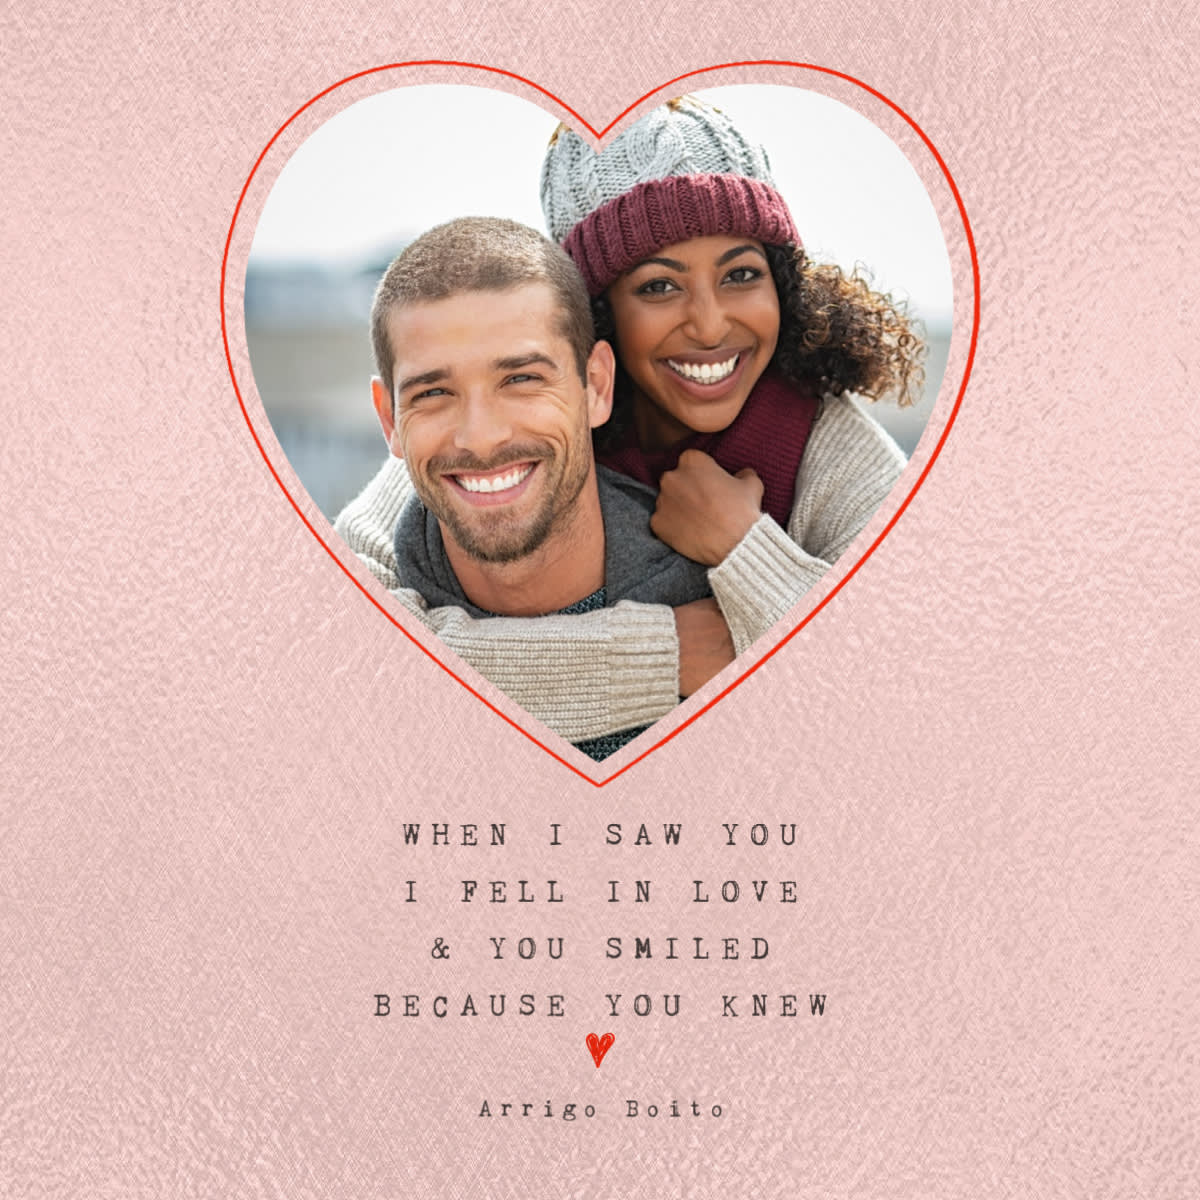 Pink textured background with heart-shaped cut-out in center featuring a male and female couple with a bold red outline.. Woman has arms around man. Black typewriter text reads, "When I saw you I fell in love & you smiled because you knew."